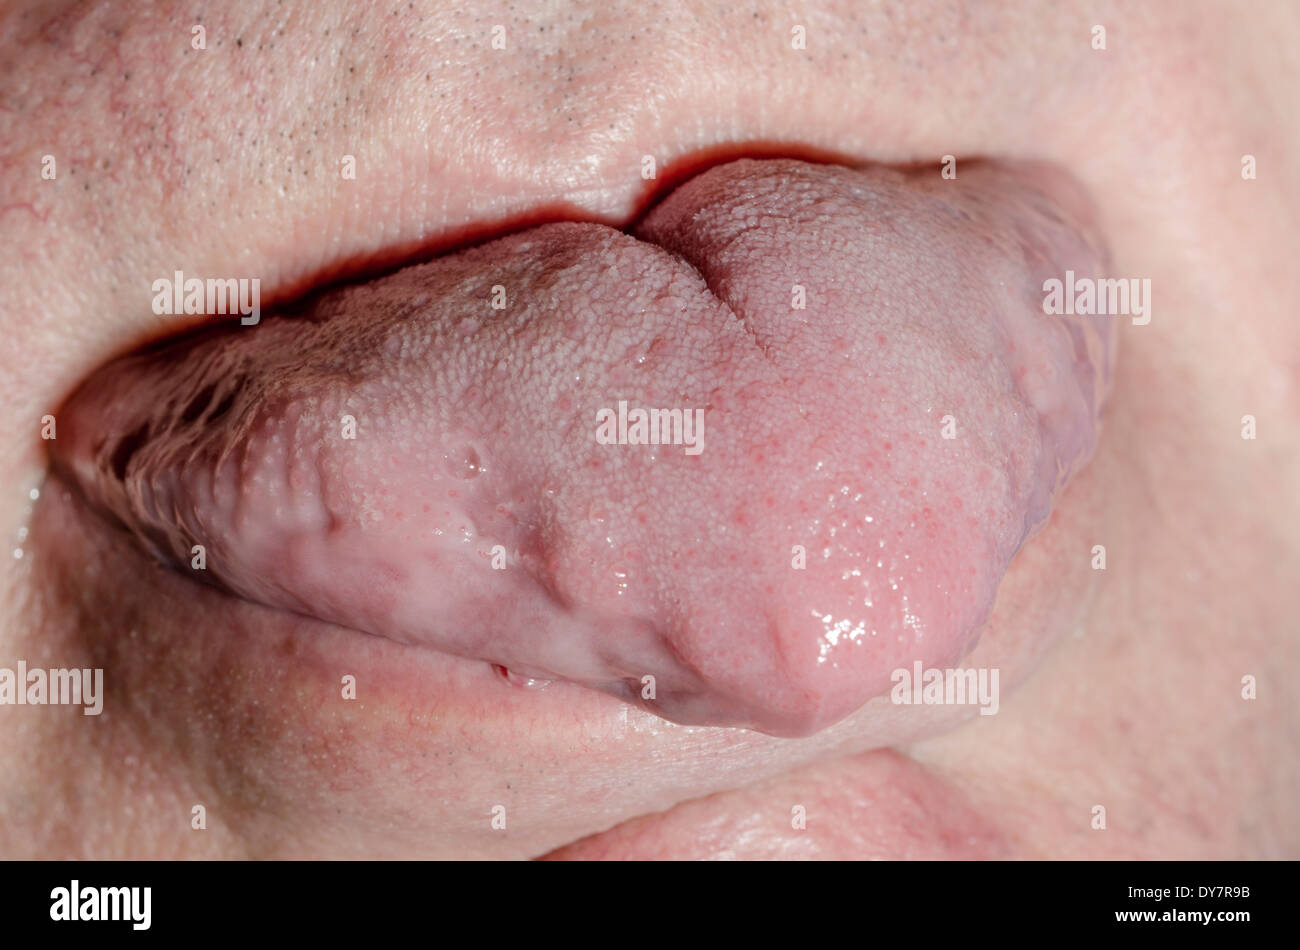 Tongue sticking out on a white mans face. Stock Photo